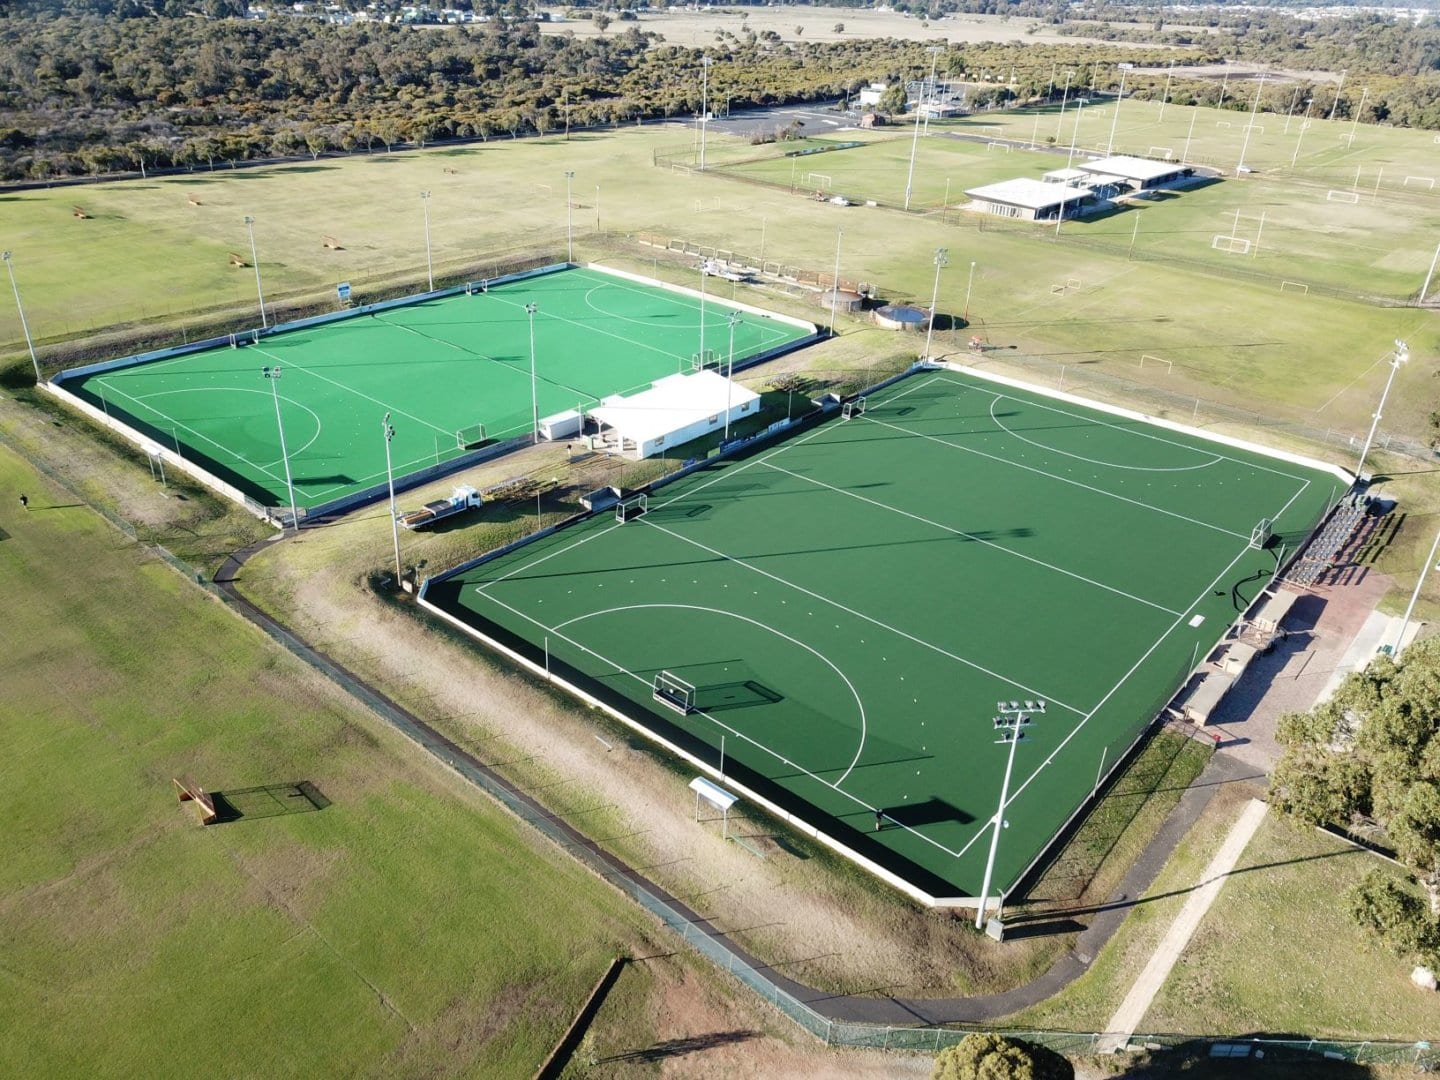 The Greenfields TX Pro hockey surface was the ideal solution for Bunbury Hockey Association